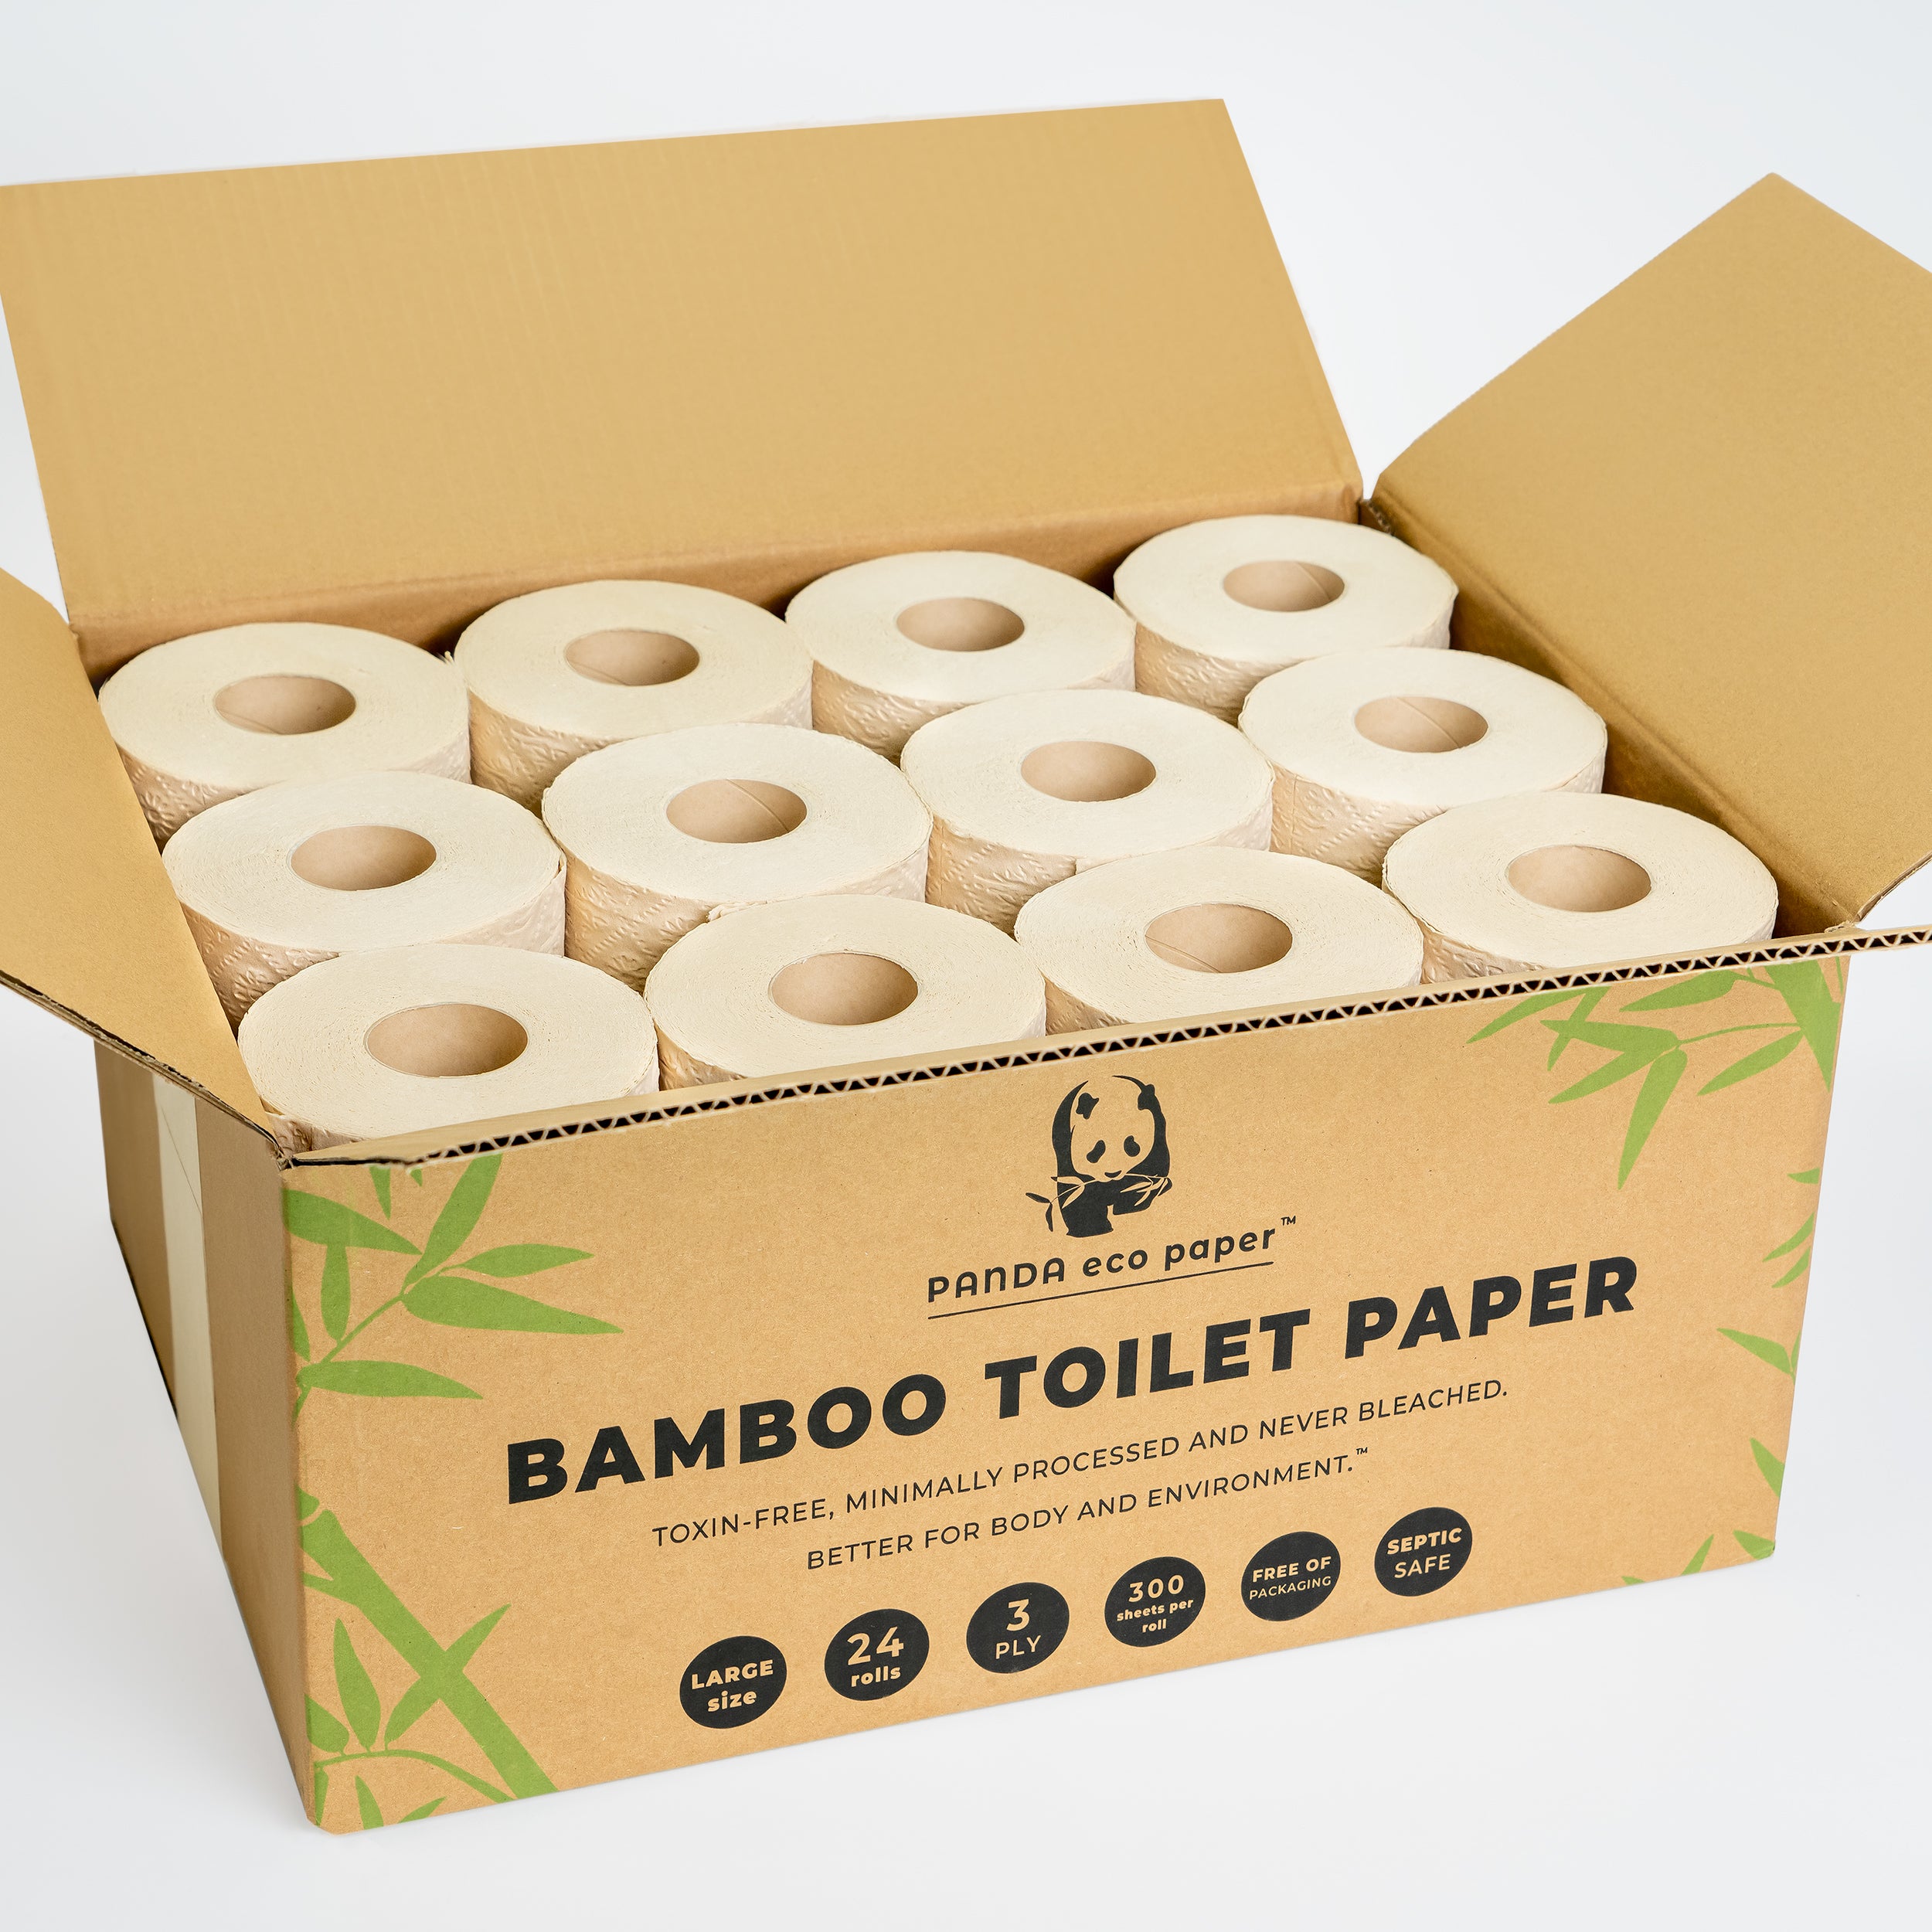 Artisanal Toilet Rolls : Unbleached bamboo toilet paper